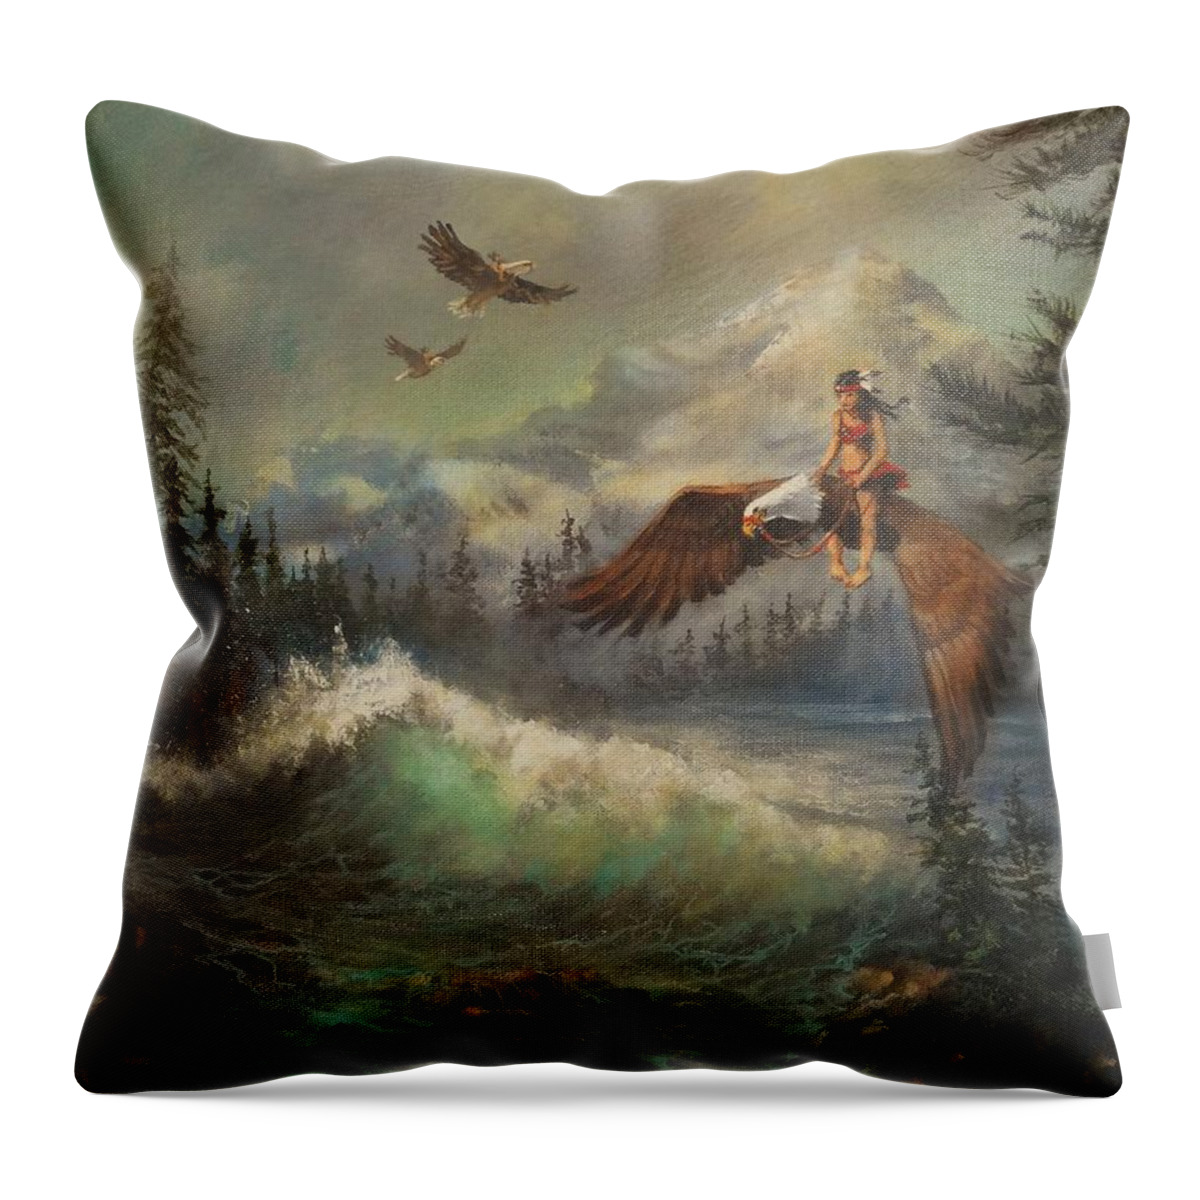 ; People Flying On Eagles Throw Pillow featuring the painting Flying On Eagles by Tom Shropshire